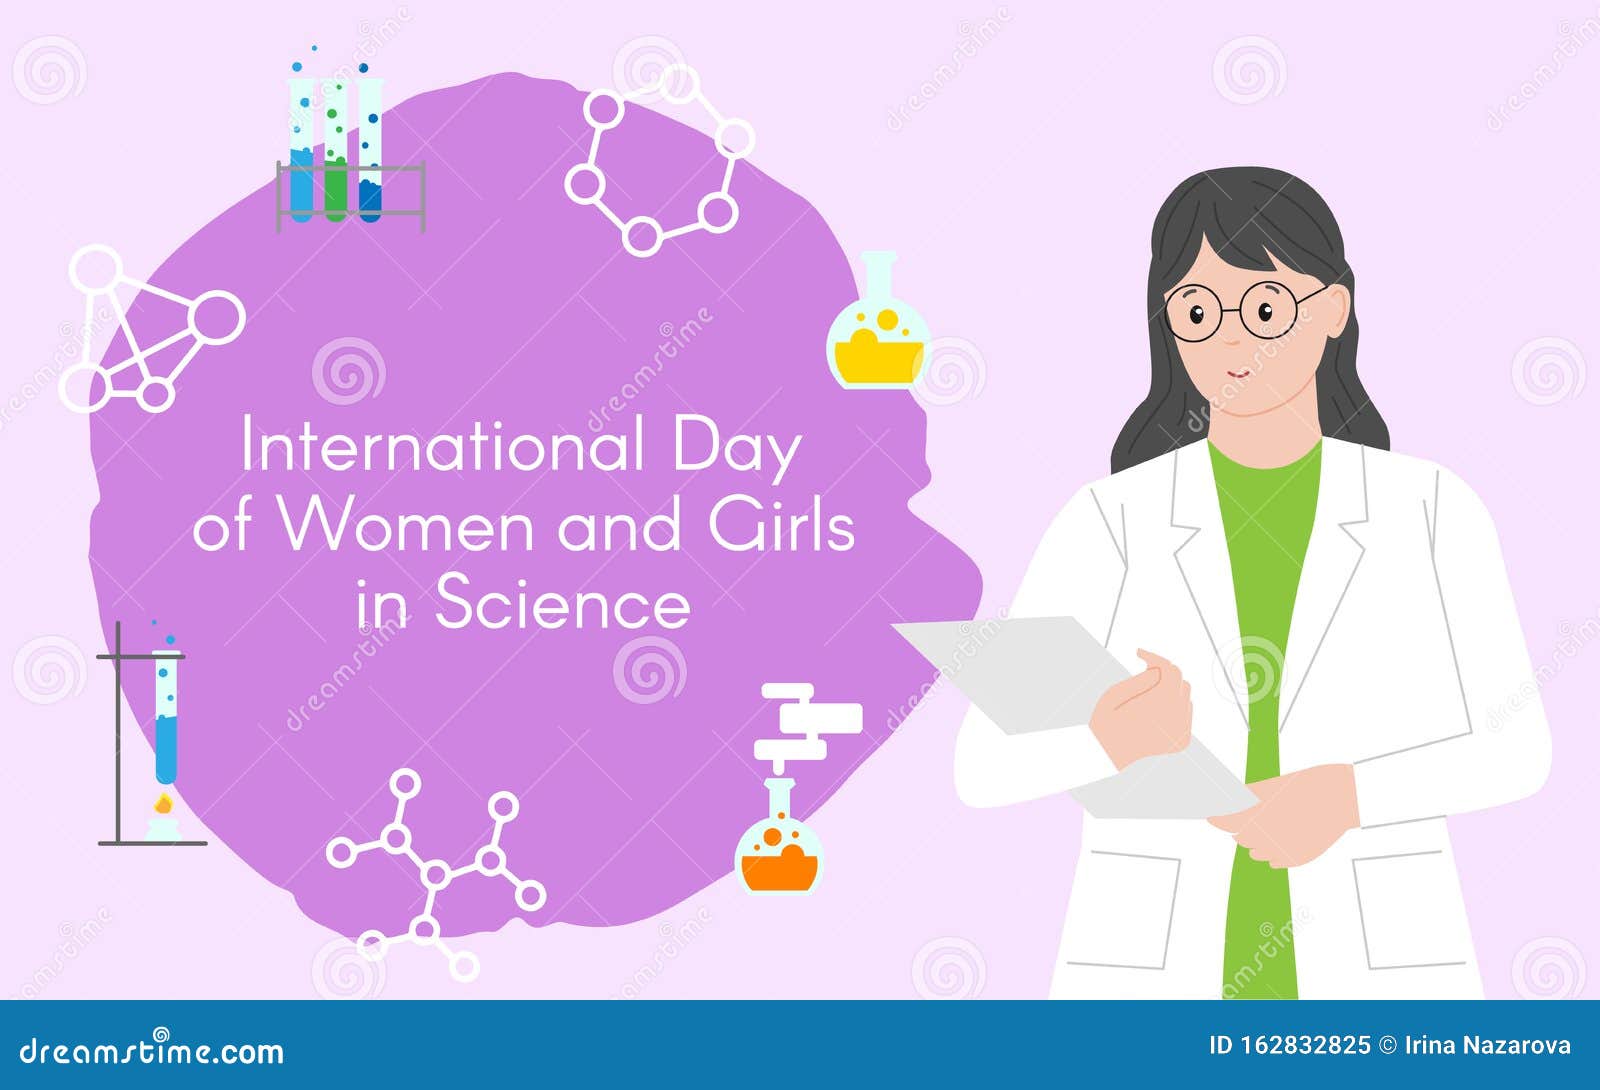 woman chemist with a folder. international day of women and girls in science. woman scientist. flat style. set of icons.